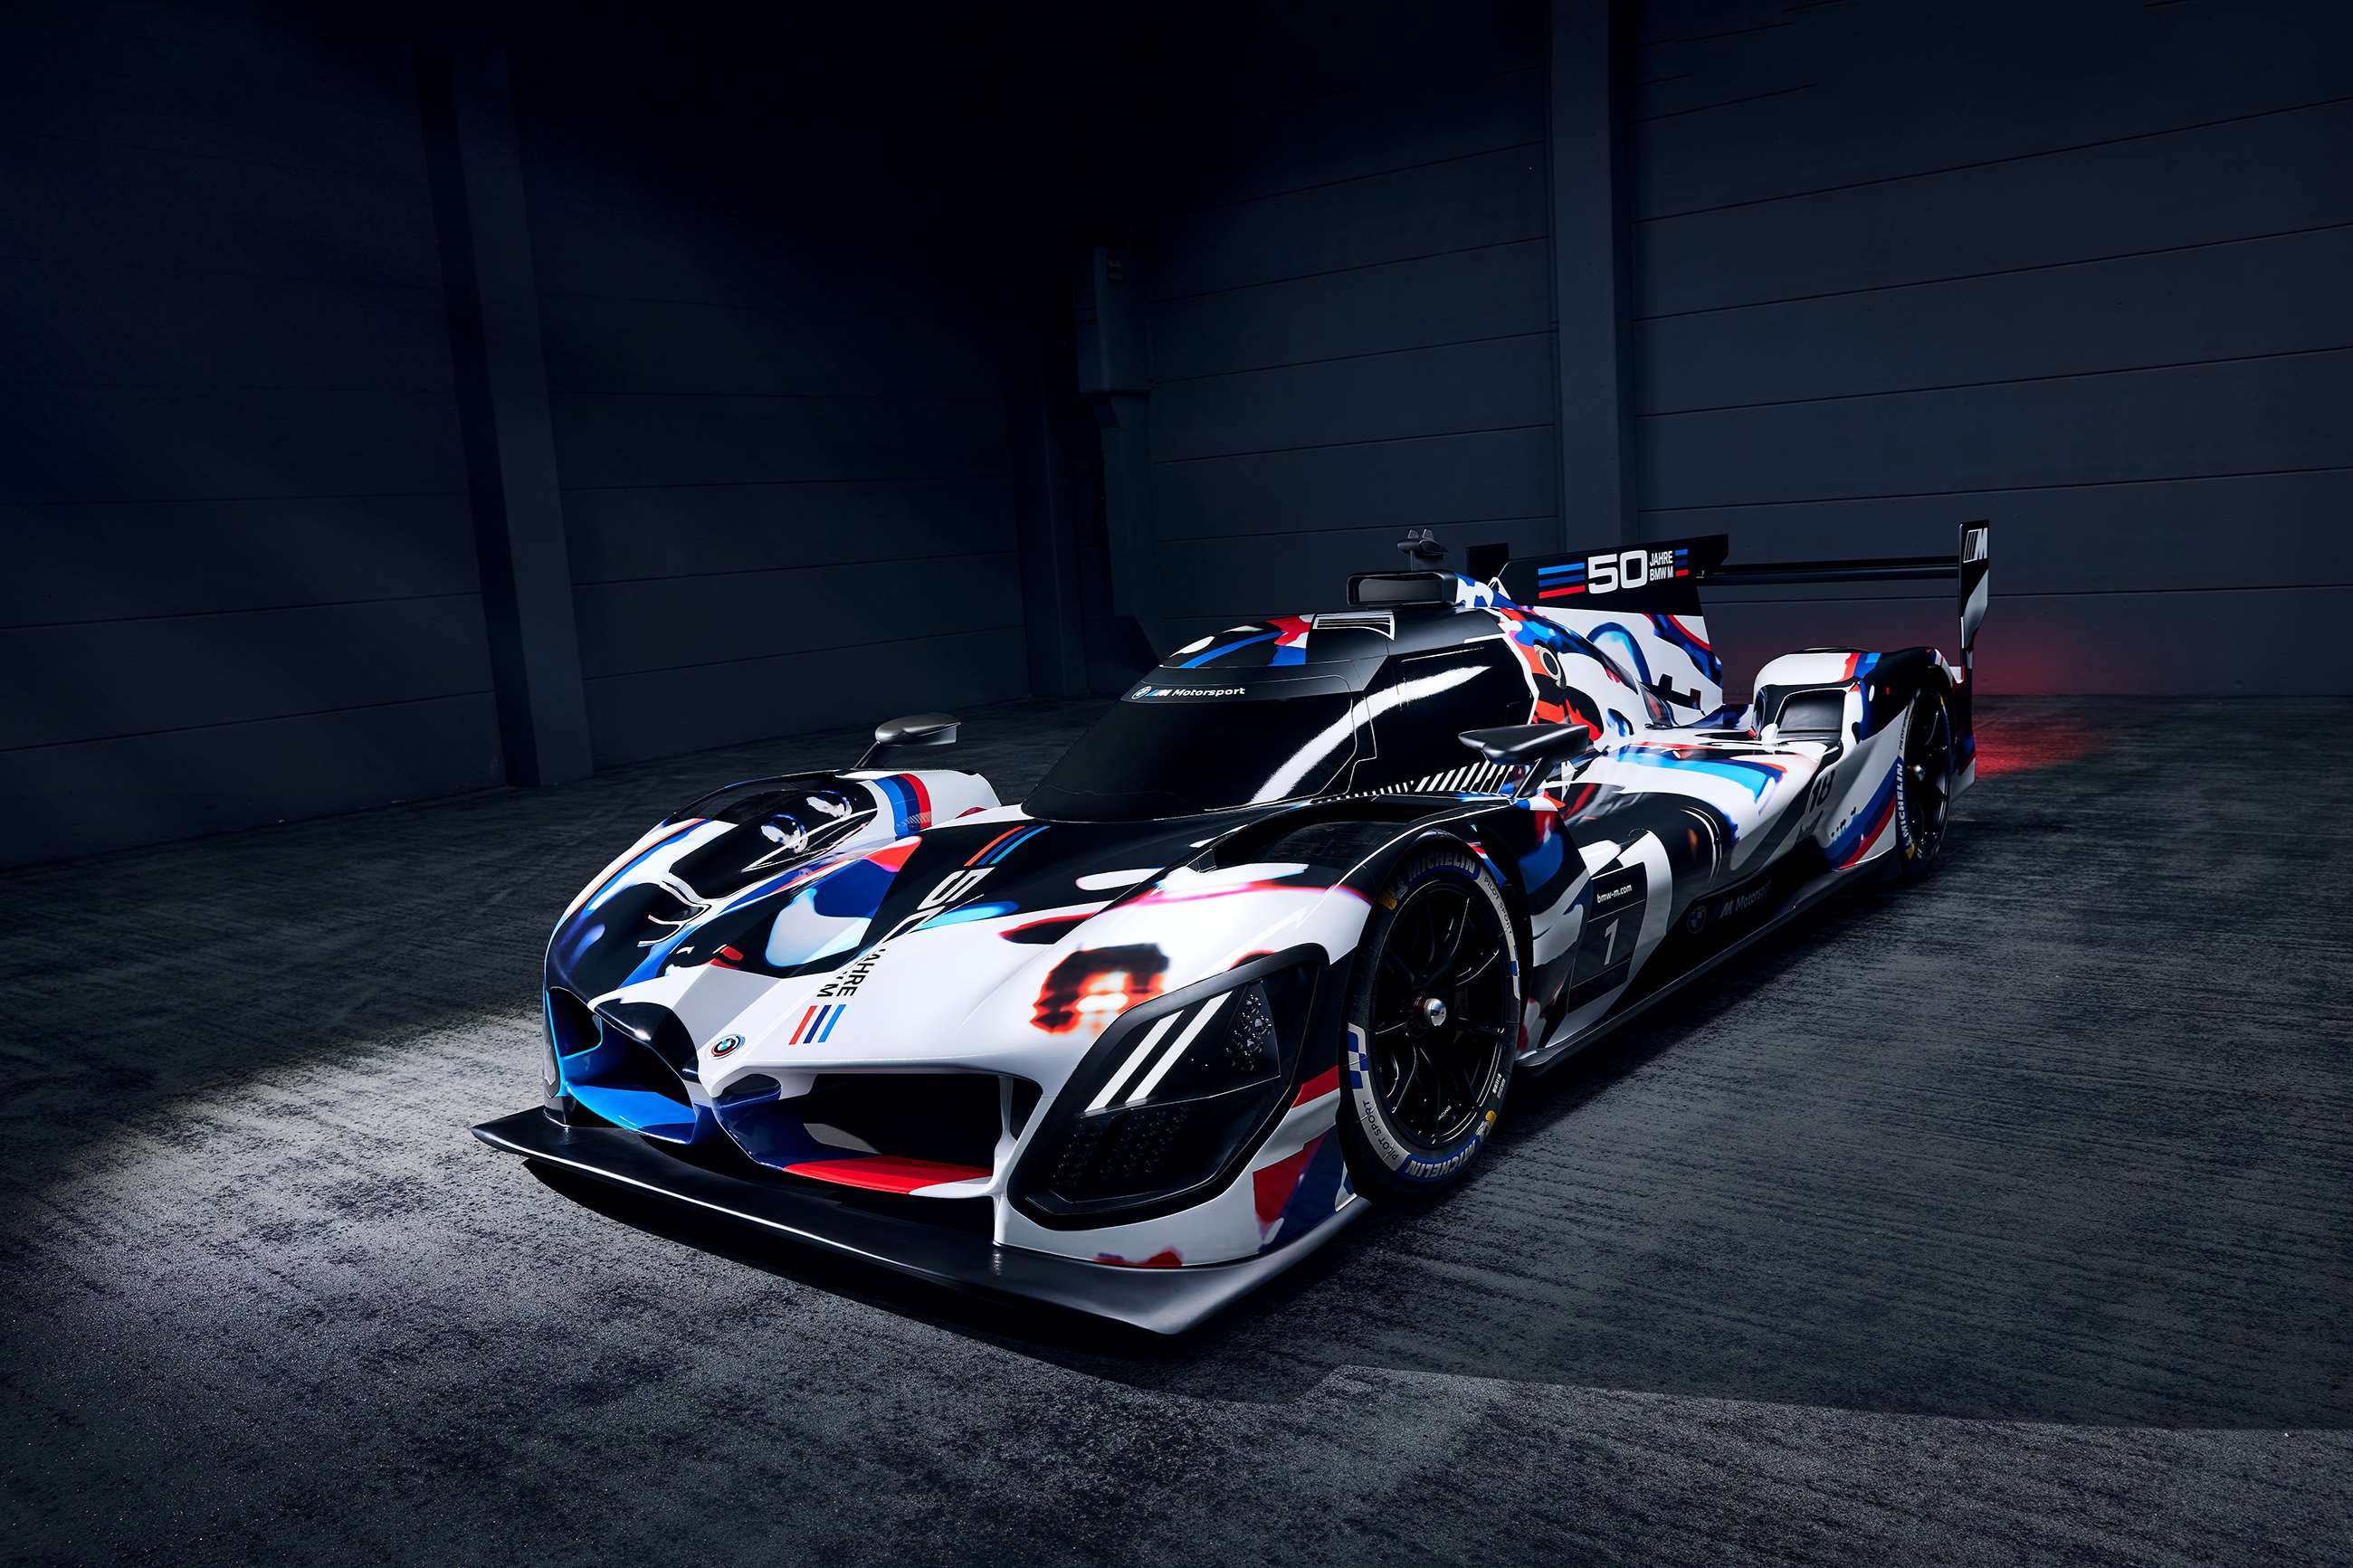 This is the car BMW could race at Le Mans GRR